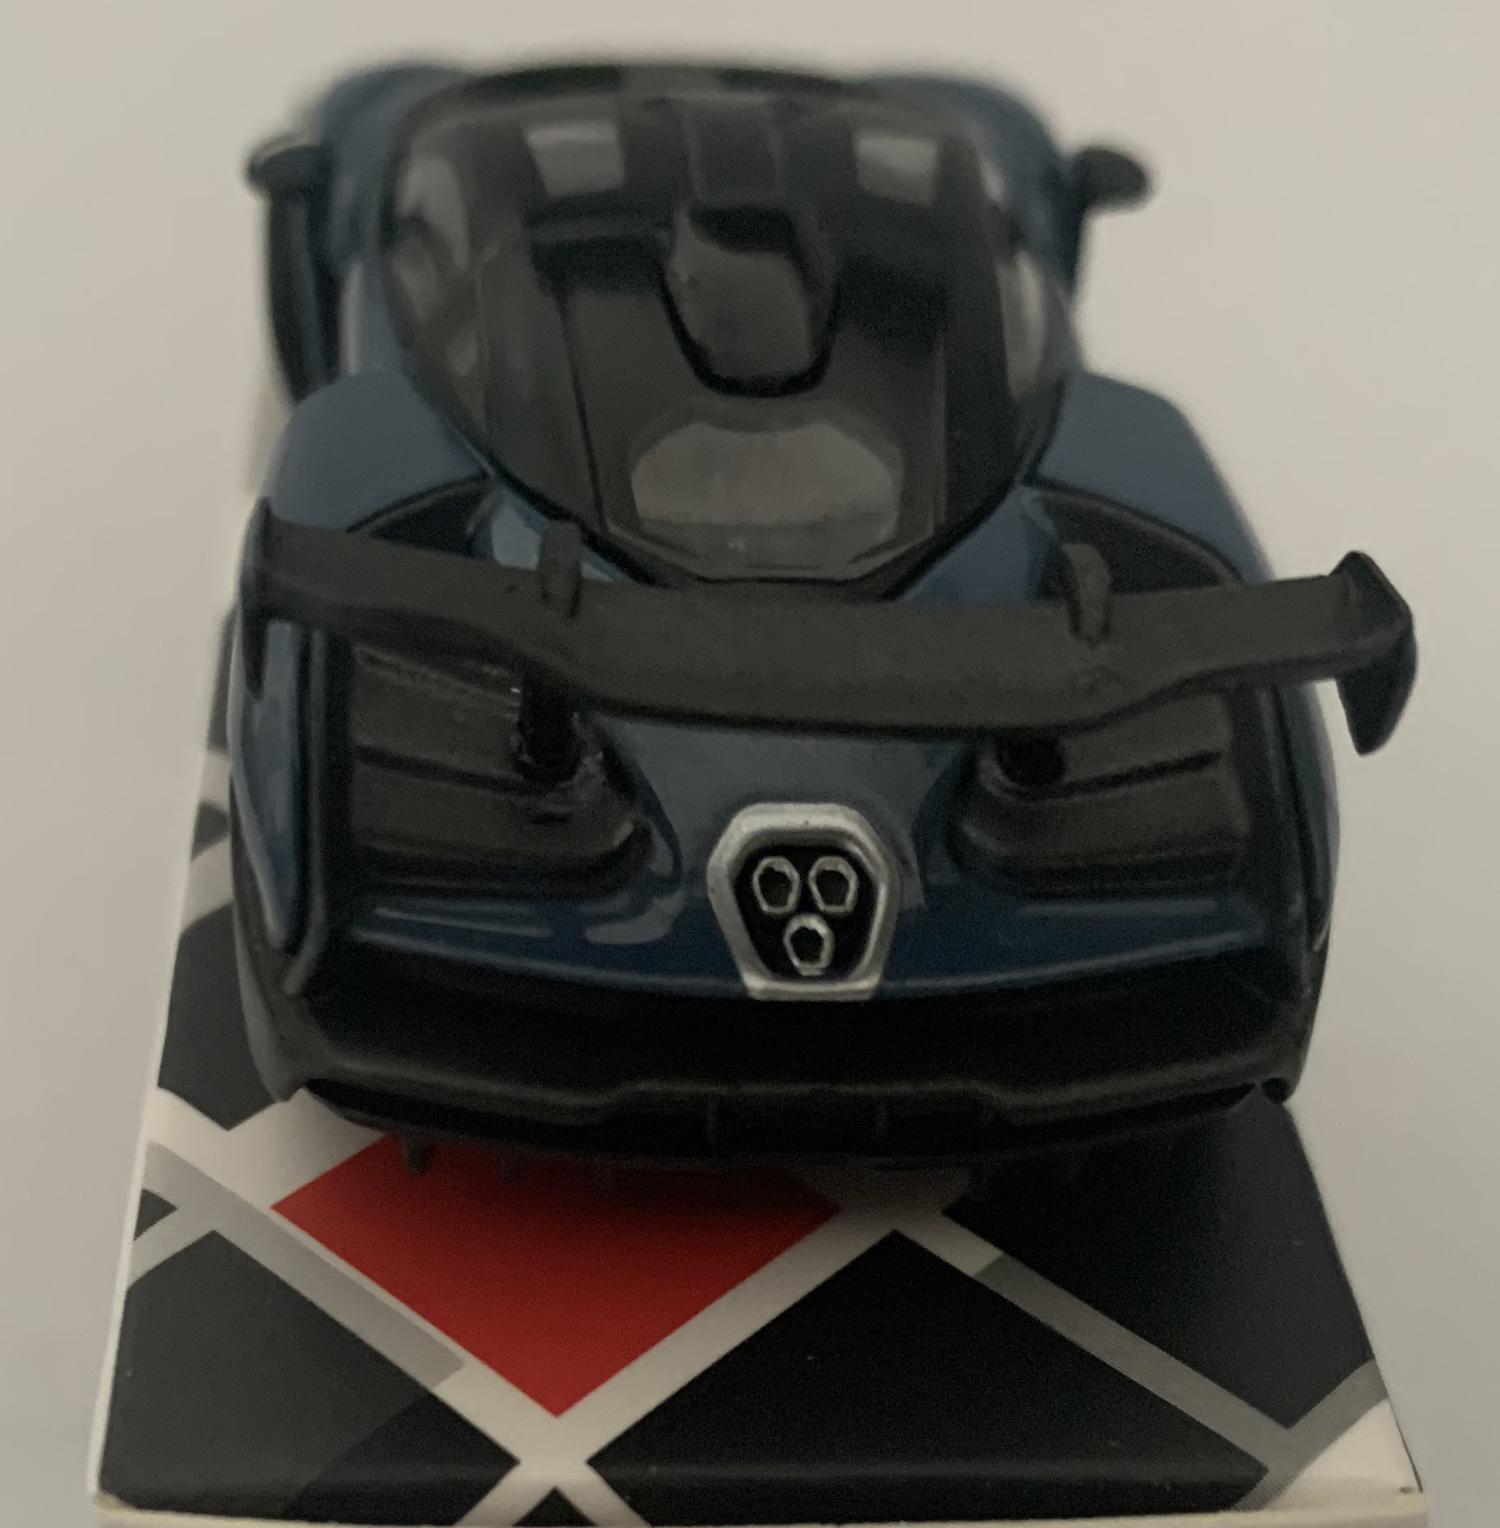 An excellent scale model of a McLaren Senna decorated in victory grey with black roof  and silver wheels.  Other trims are finished in black and yellow